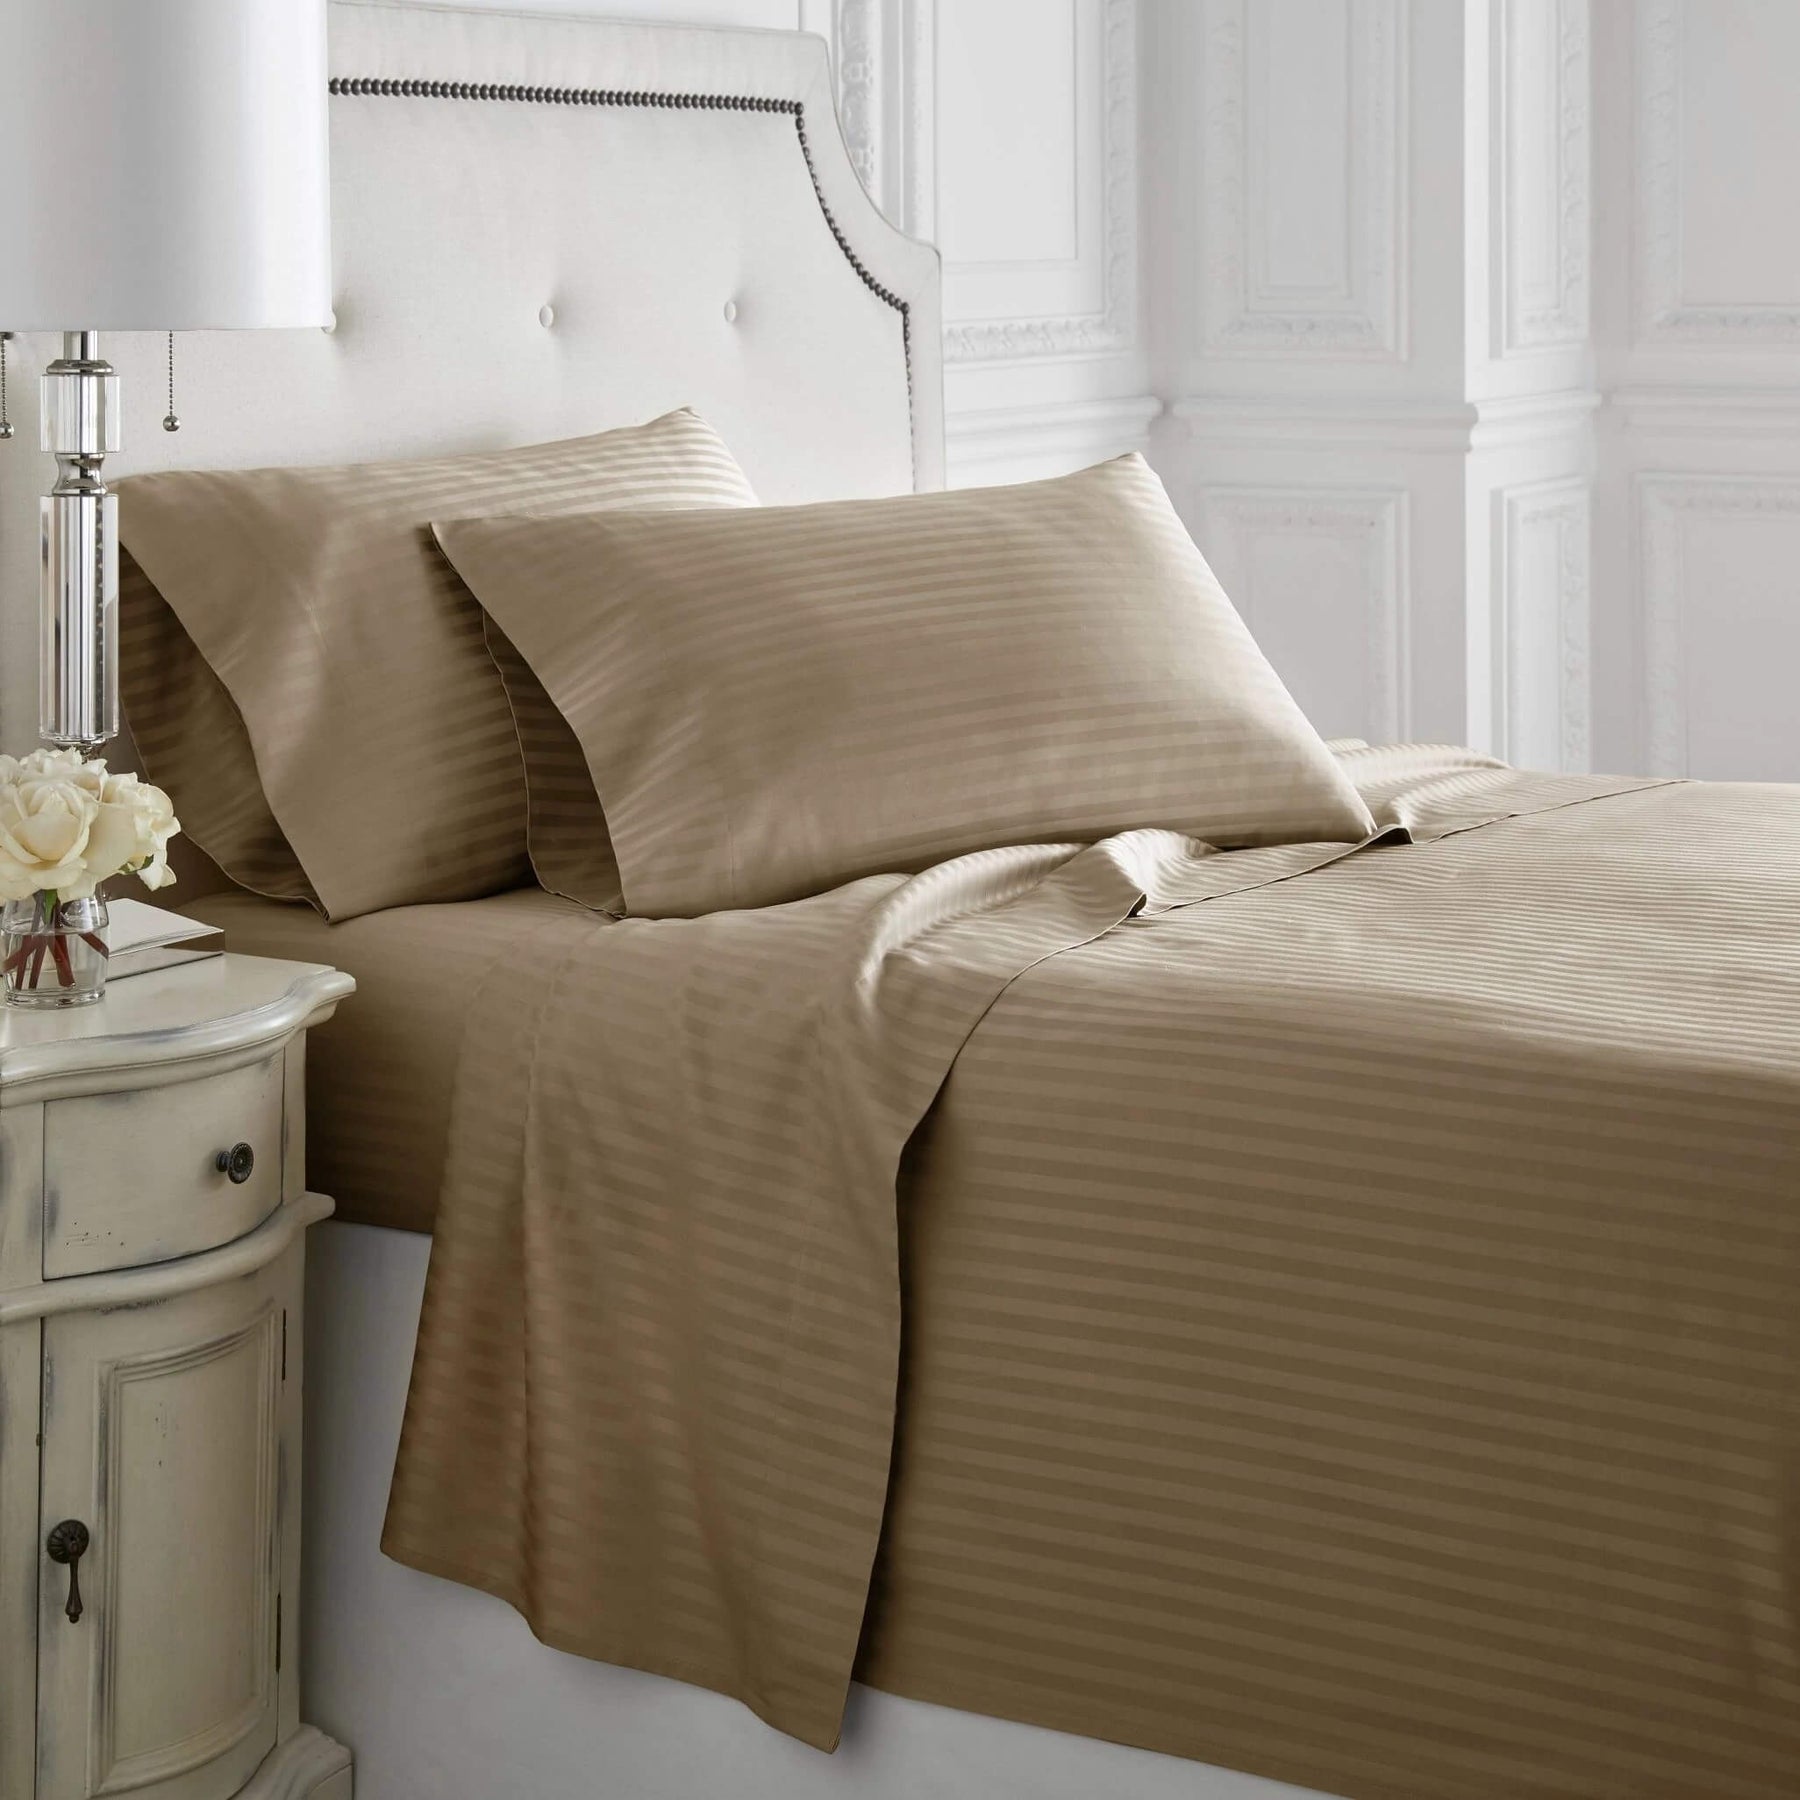 https://cdn.shopify.com/s/files/1/0405/2756/0870/products/600-thread-count-egyptian-cotton-stripe-sheet-set-in-taupe_1800x1800.jpg?v=1663004504